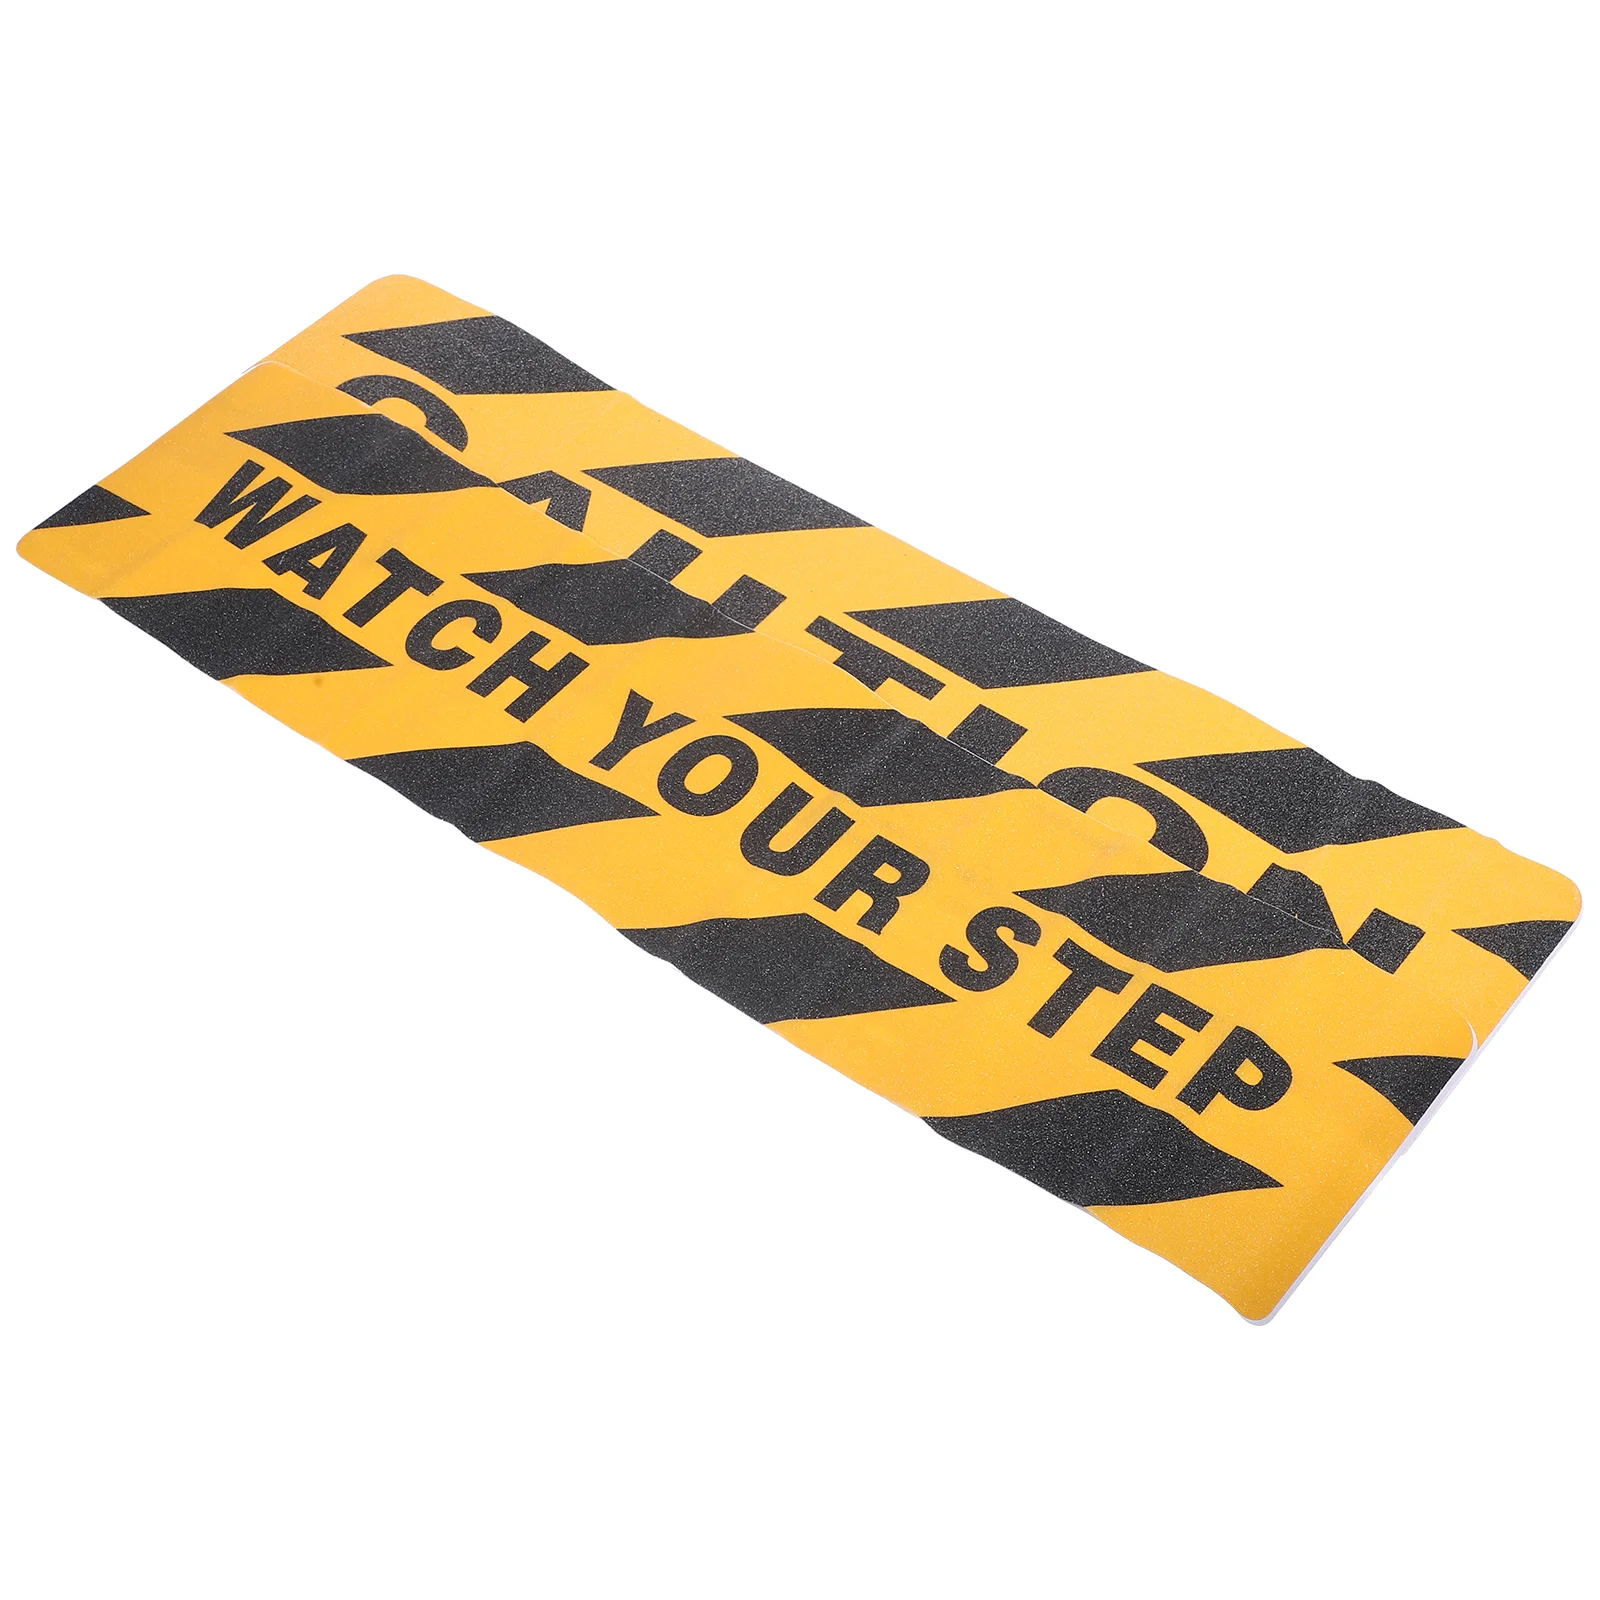 

2 Pcs Non-slip Stickers Skid Tape Anti-slip Floor Decal Watch Your Step Sign Grip Convenient Caution Adhesive Warning Tapes Pvc